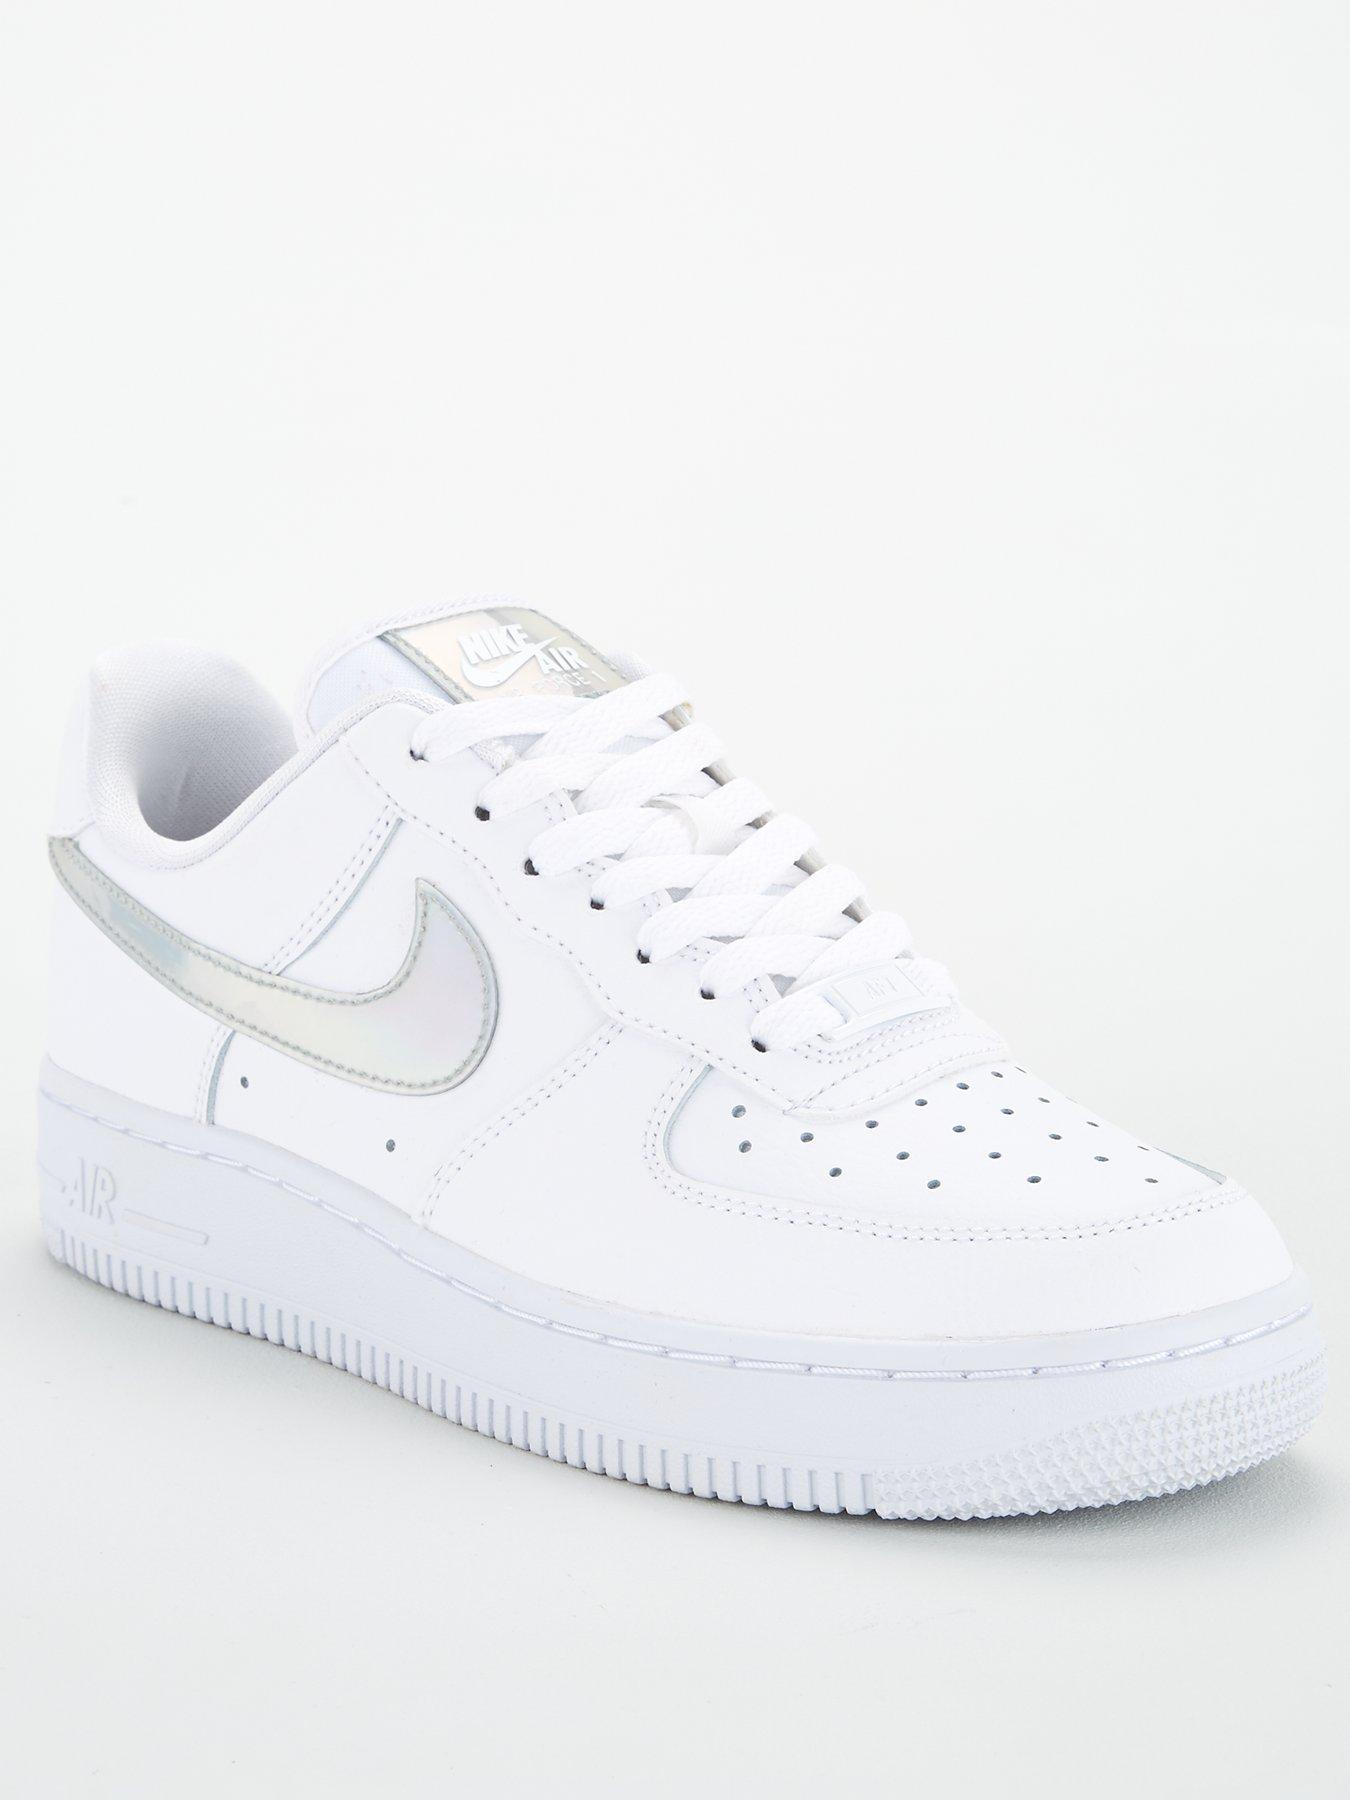 silver tick air force 1